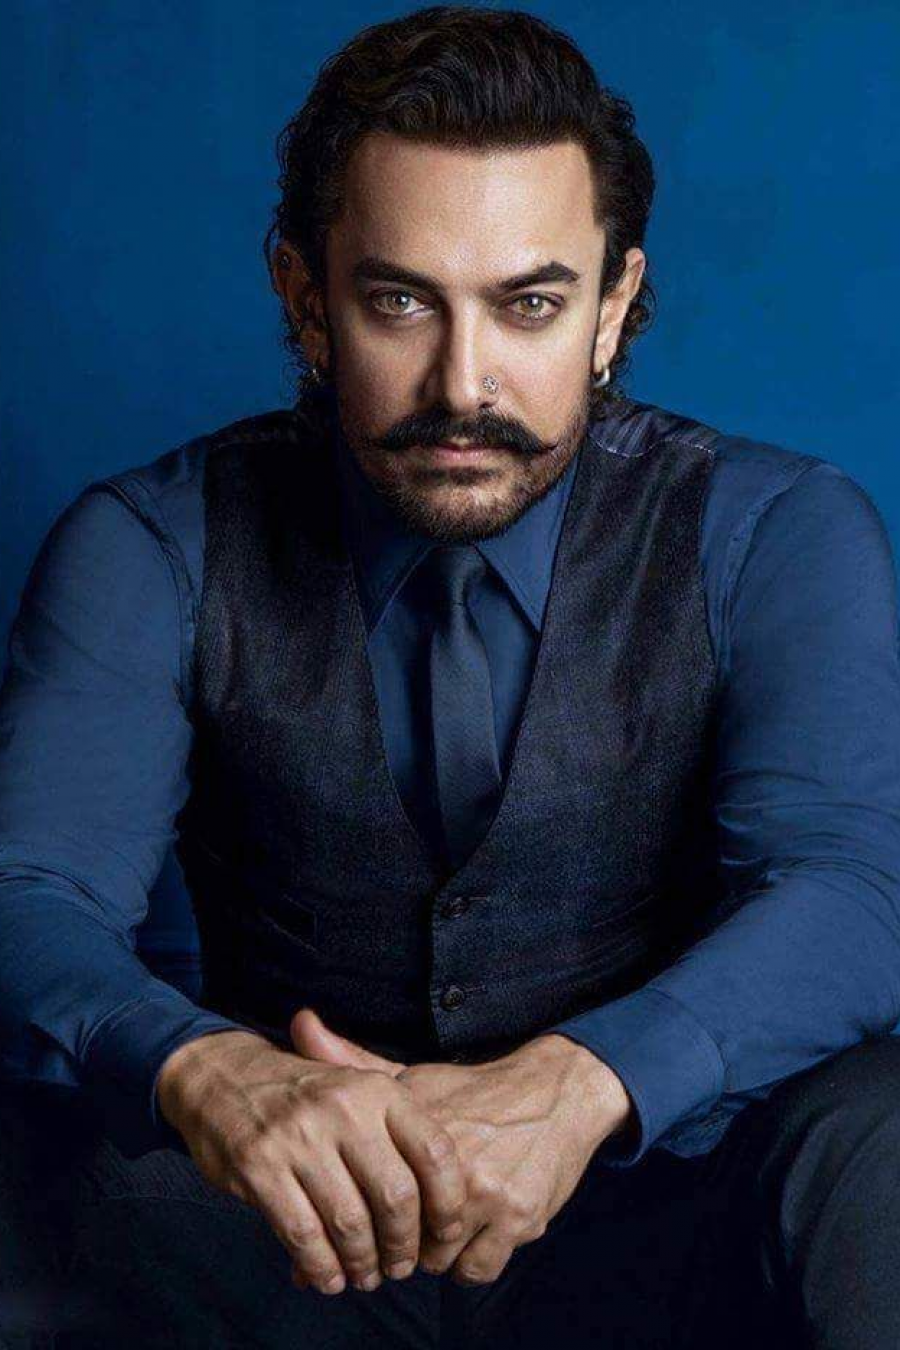 Aamir Khan On Quitting Social Media: "Do Not Put Your Theories About That"